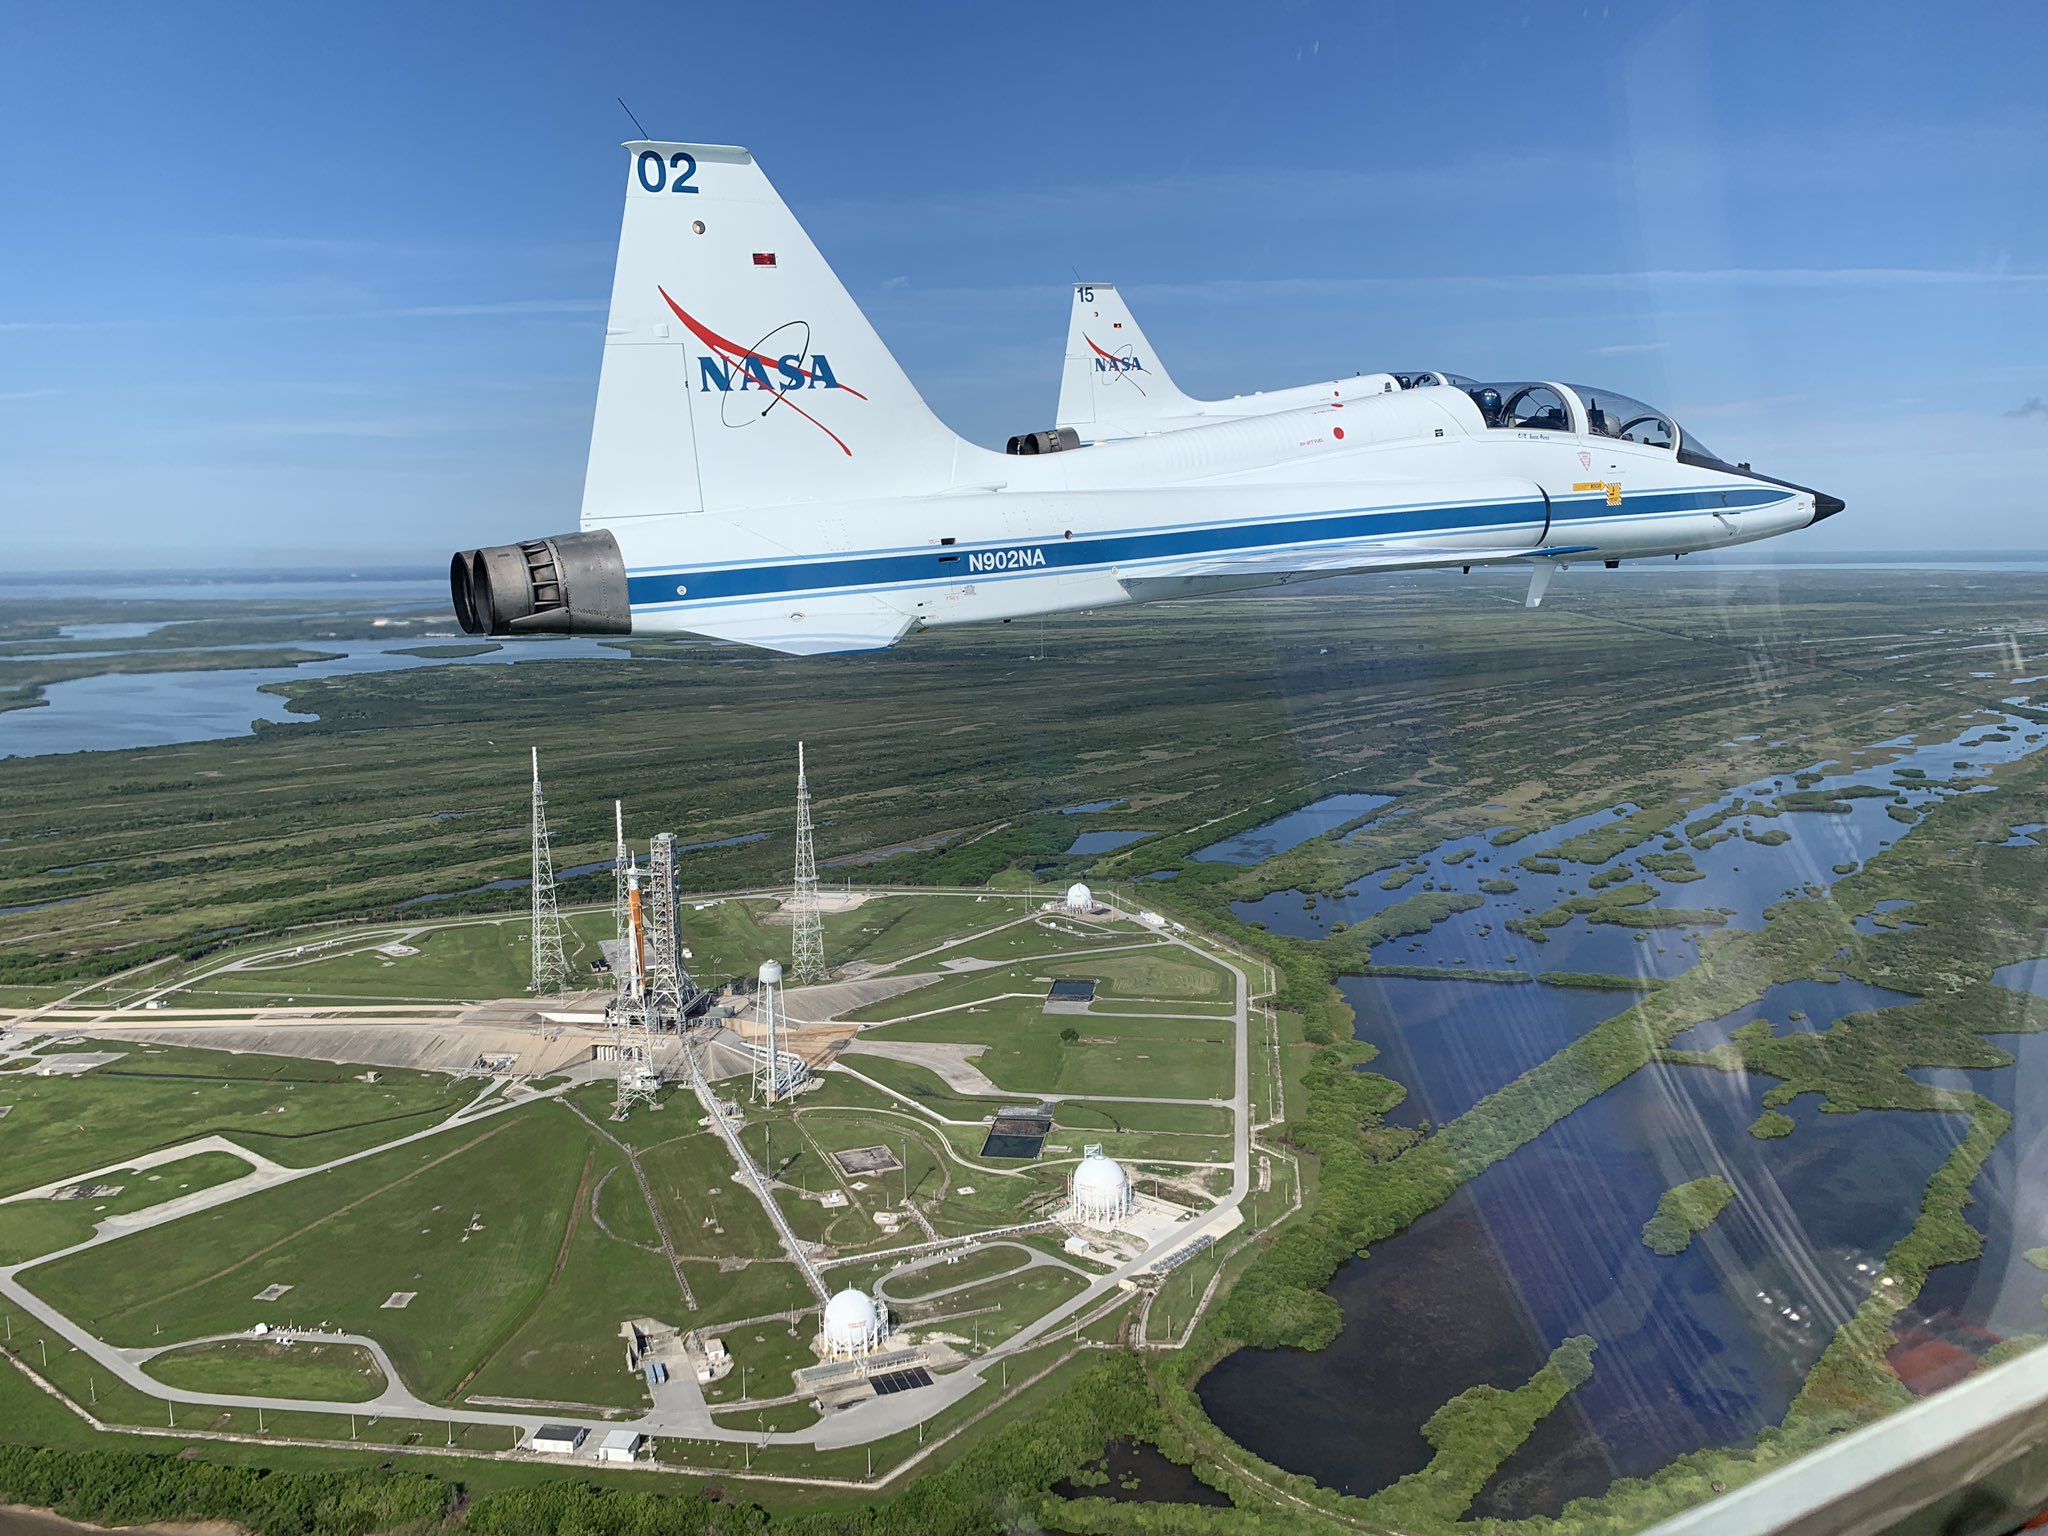 T-38 jets fly past NASA's SLS rocket at Kennedy Space Center.